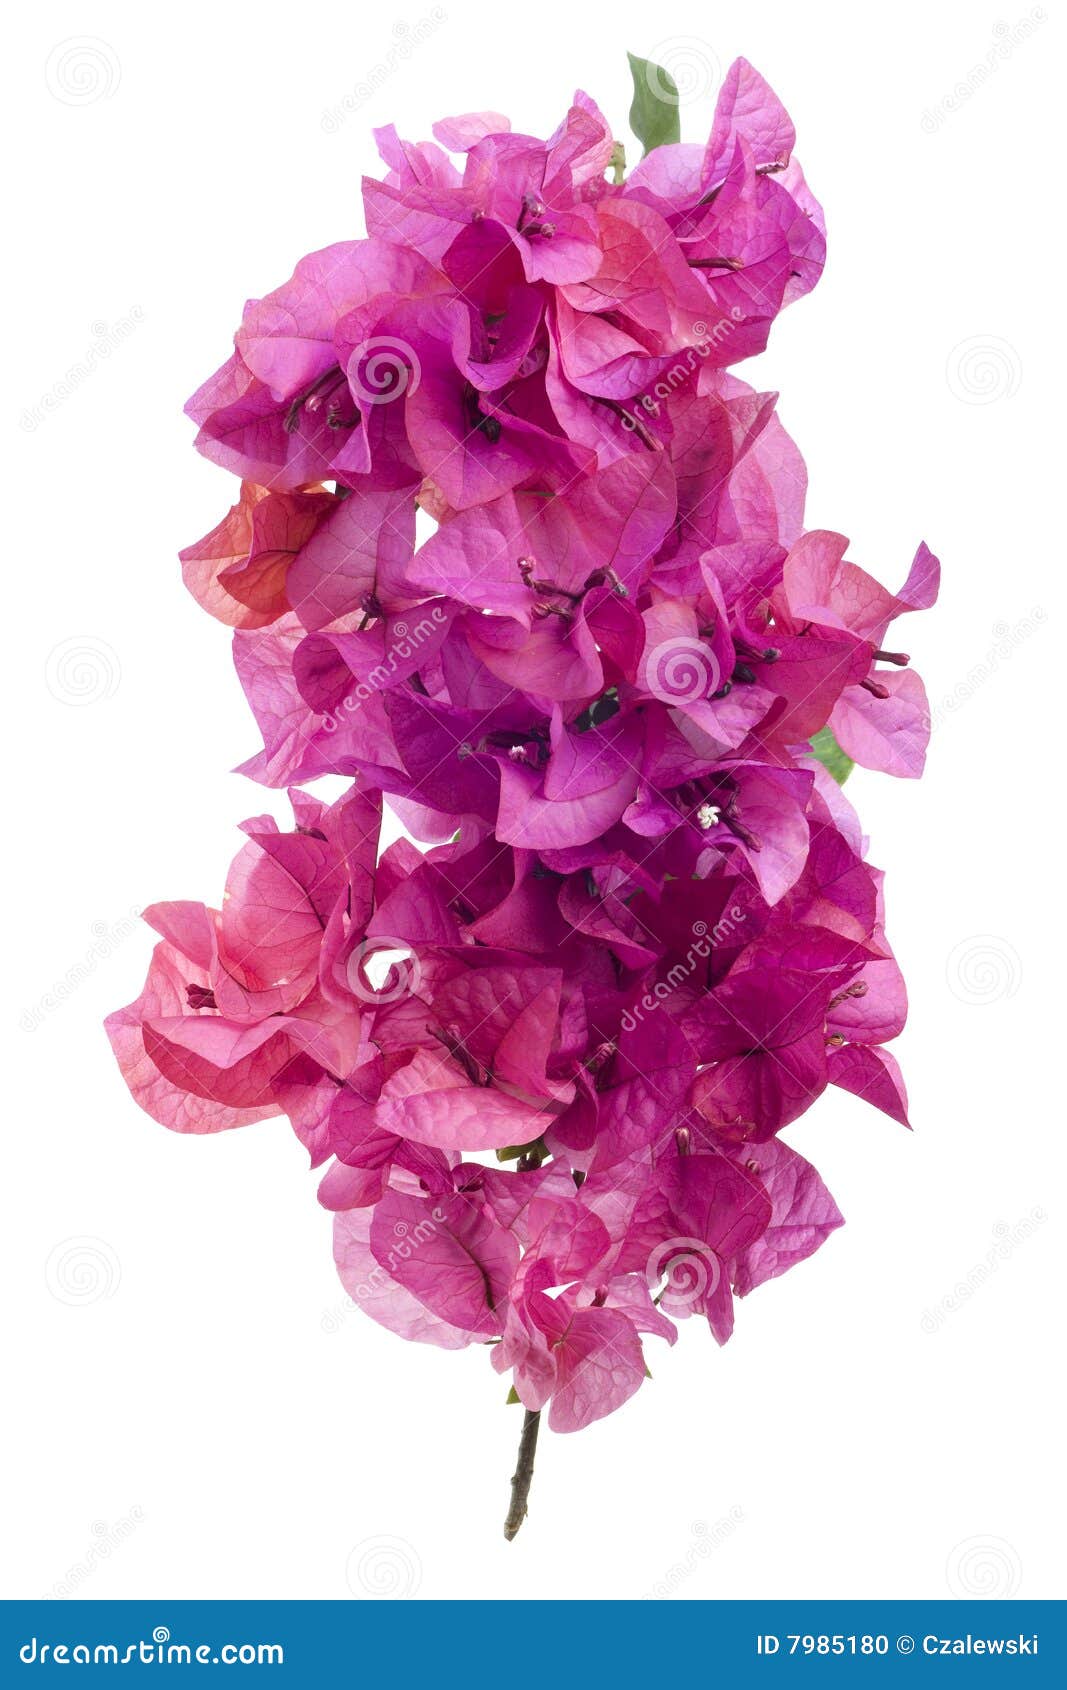 bougainvillea with pink blossoms  on white